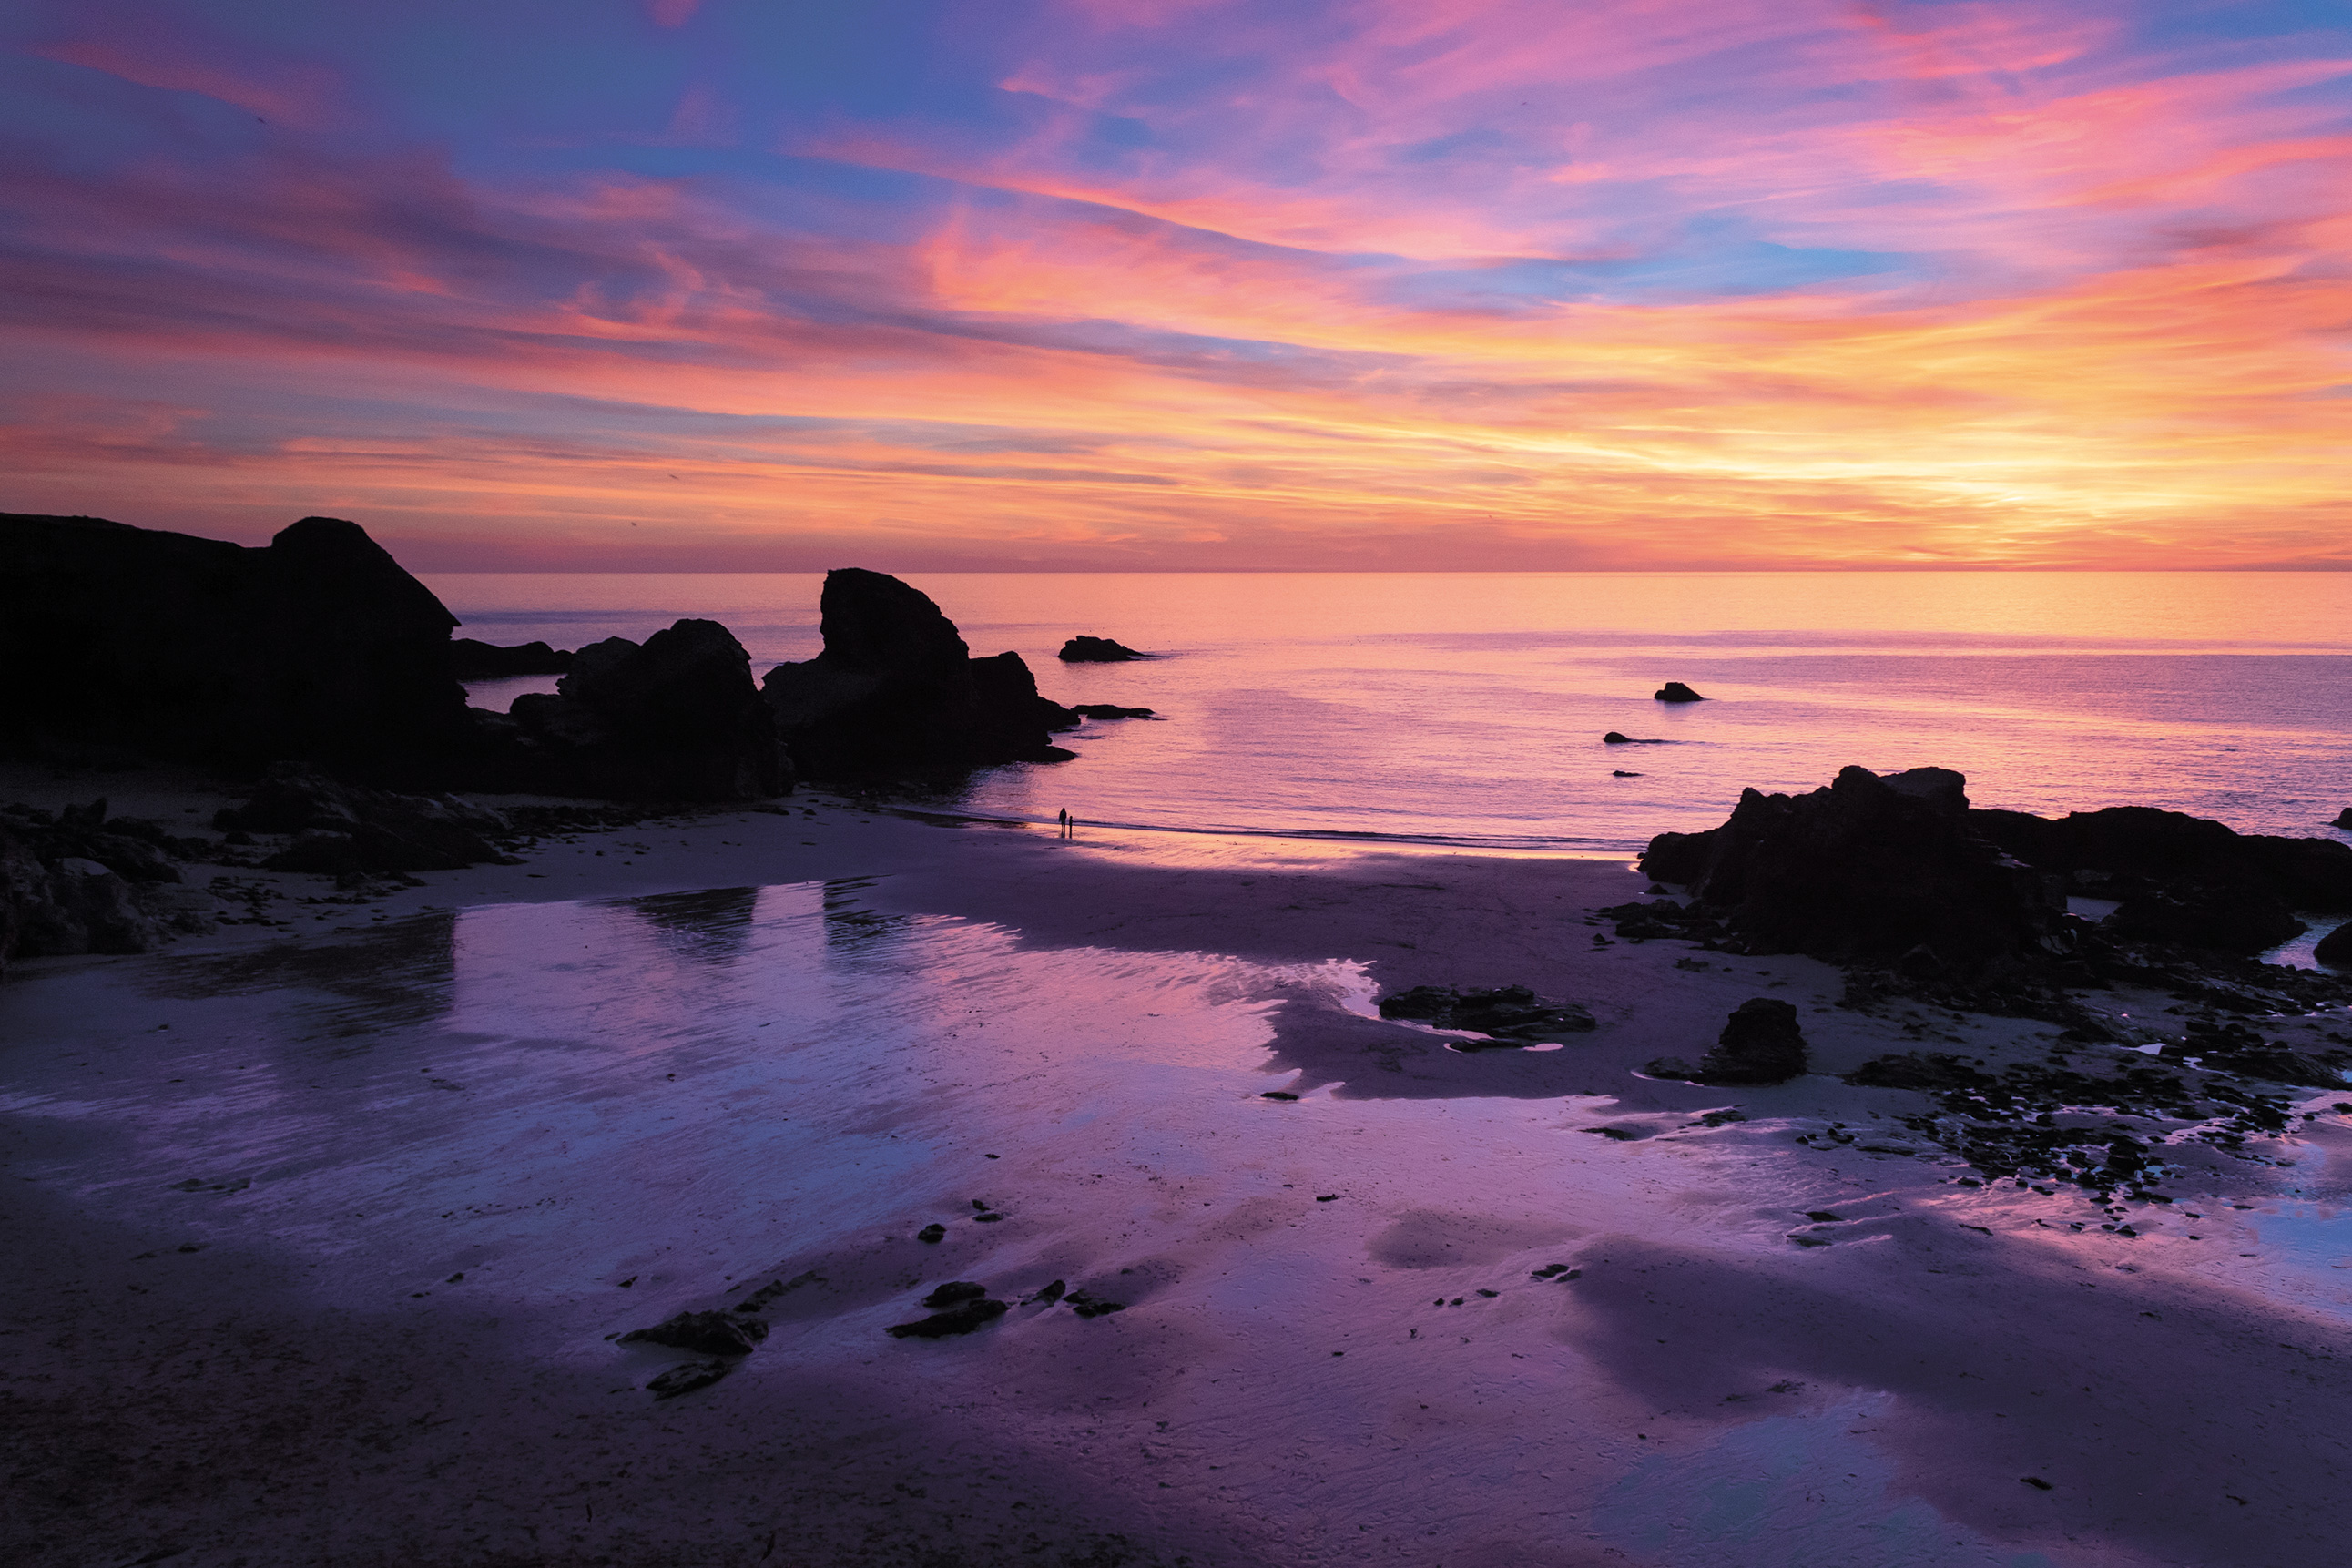 This fabulous sunset over Porthcothan beach was shot handheld. The raw file was then adjusted for tonality and vibrance in Lightroom 1/80sec at f/5, ISO 400, 18mm, photo: Audley Jarvis